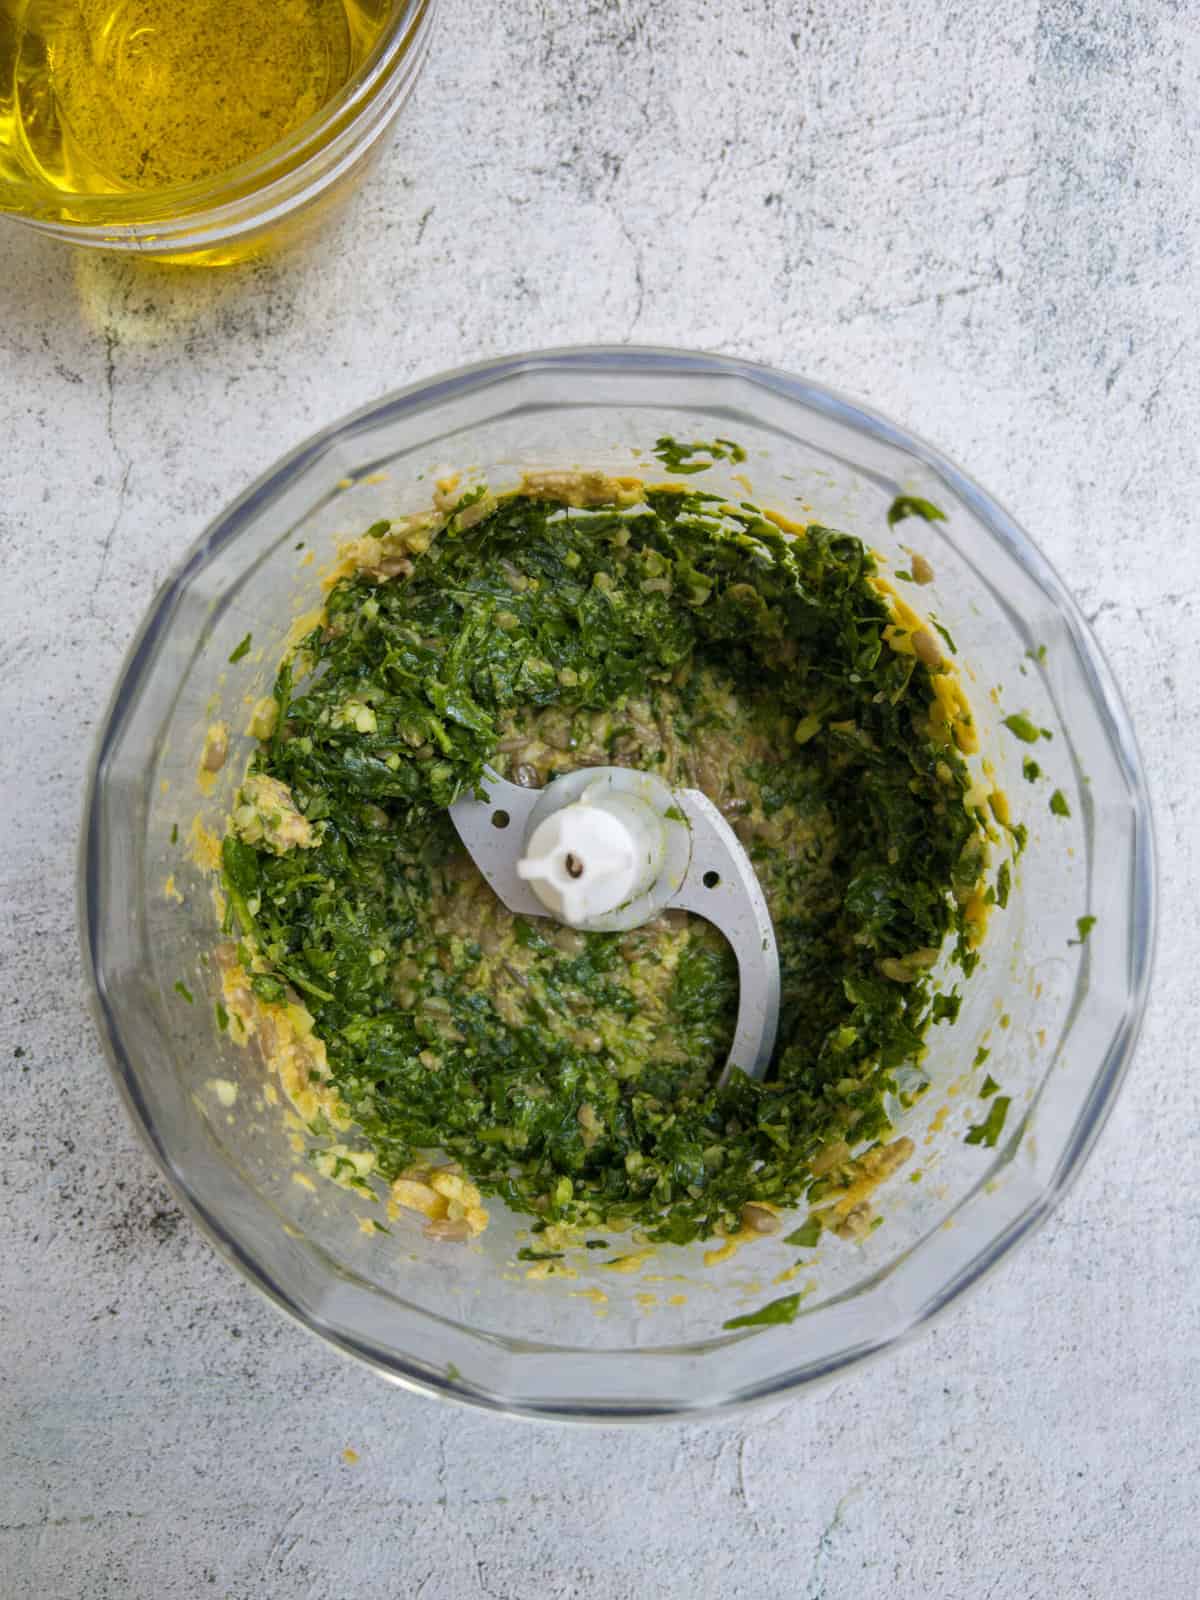 ingredients for dairy and nut free pesto in a food processor.